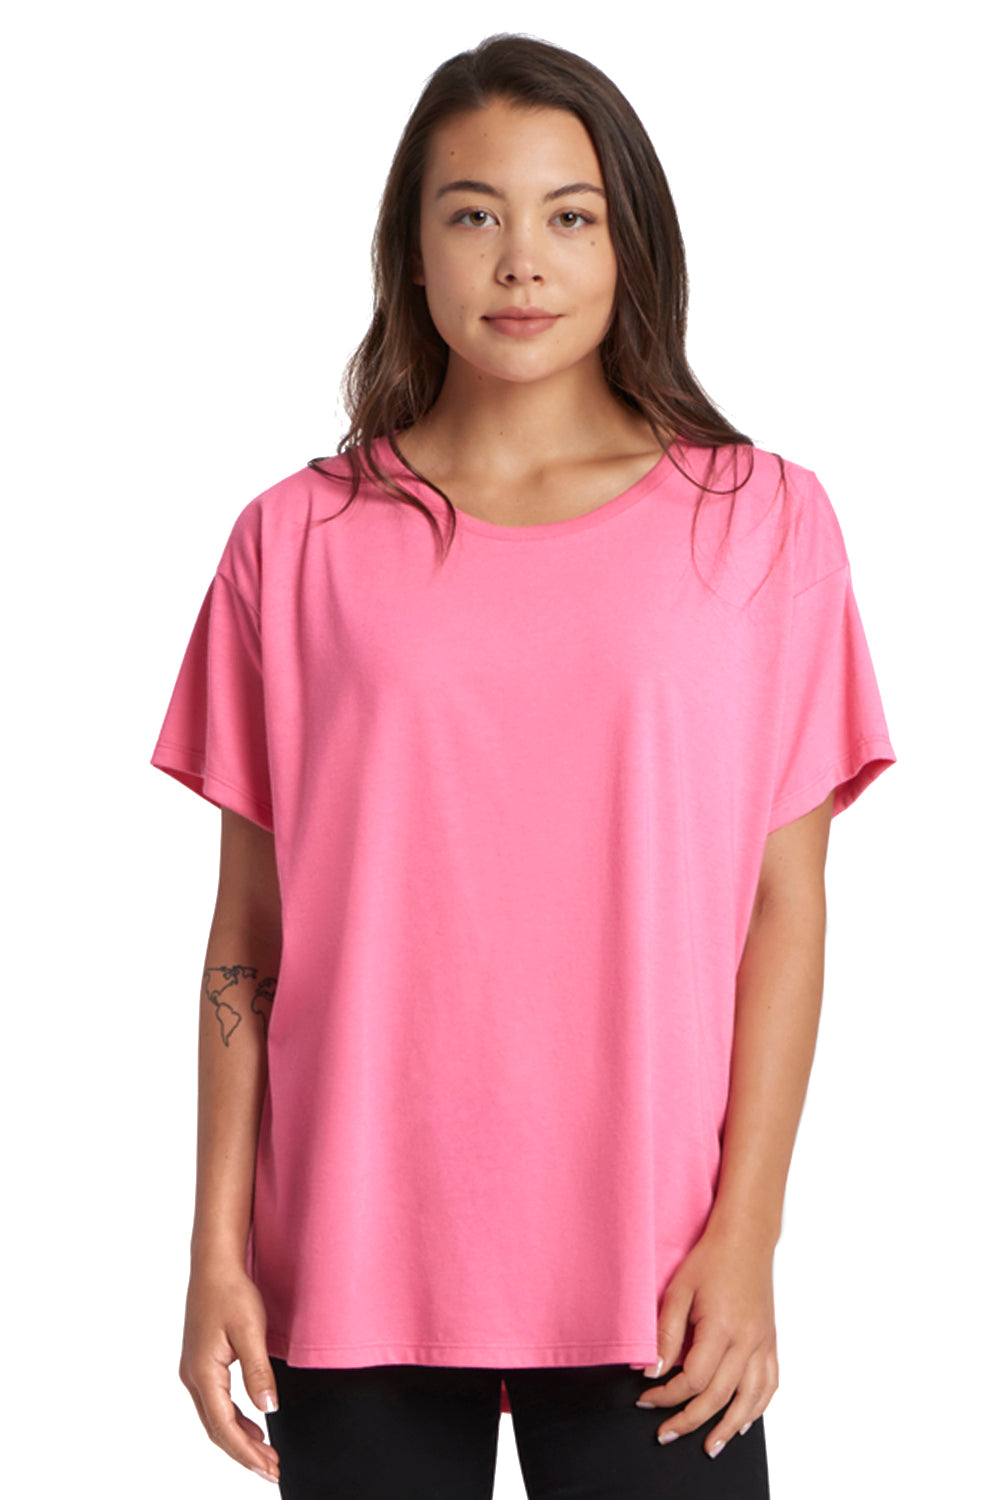 Flowy V Blouse-Baby Pink Small